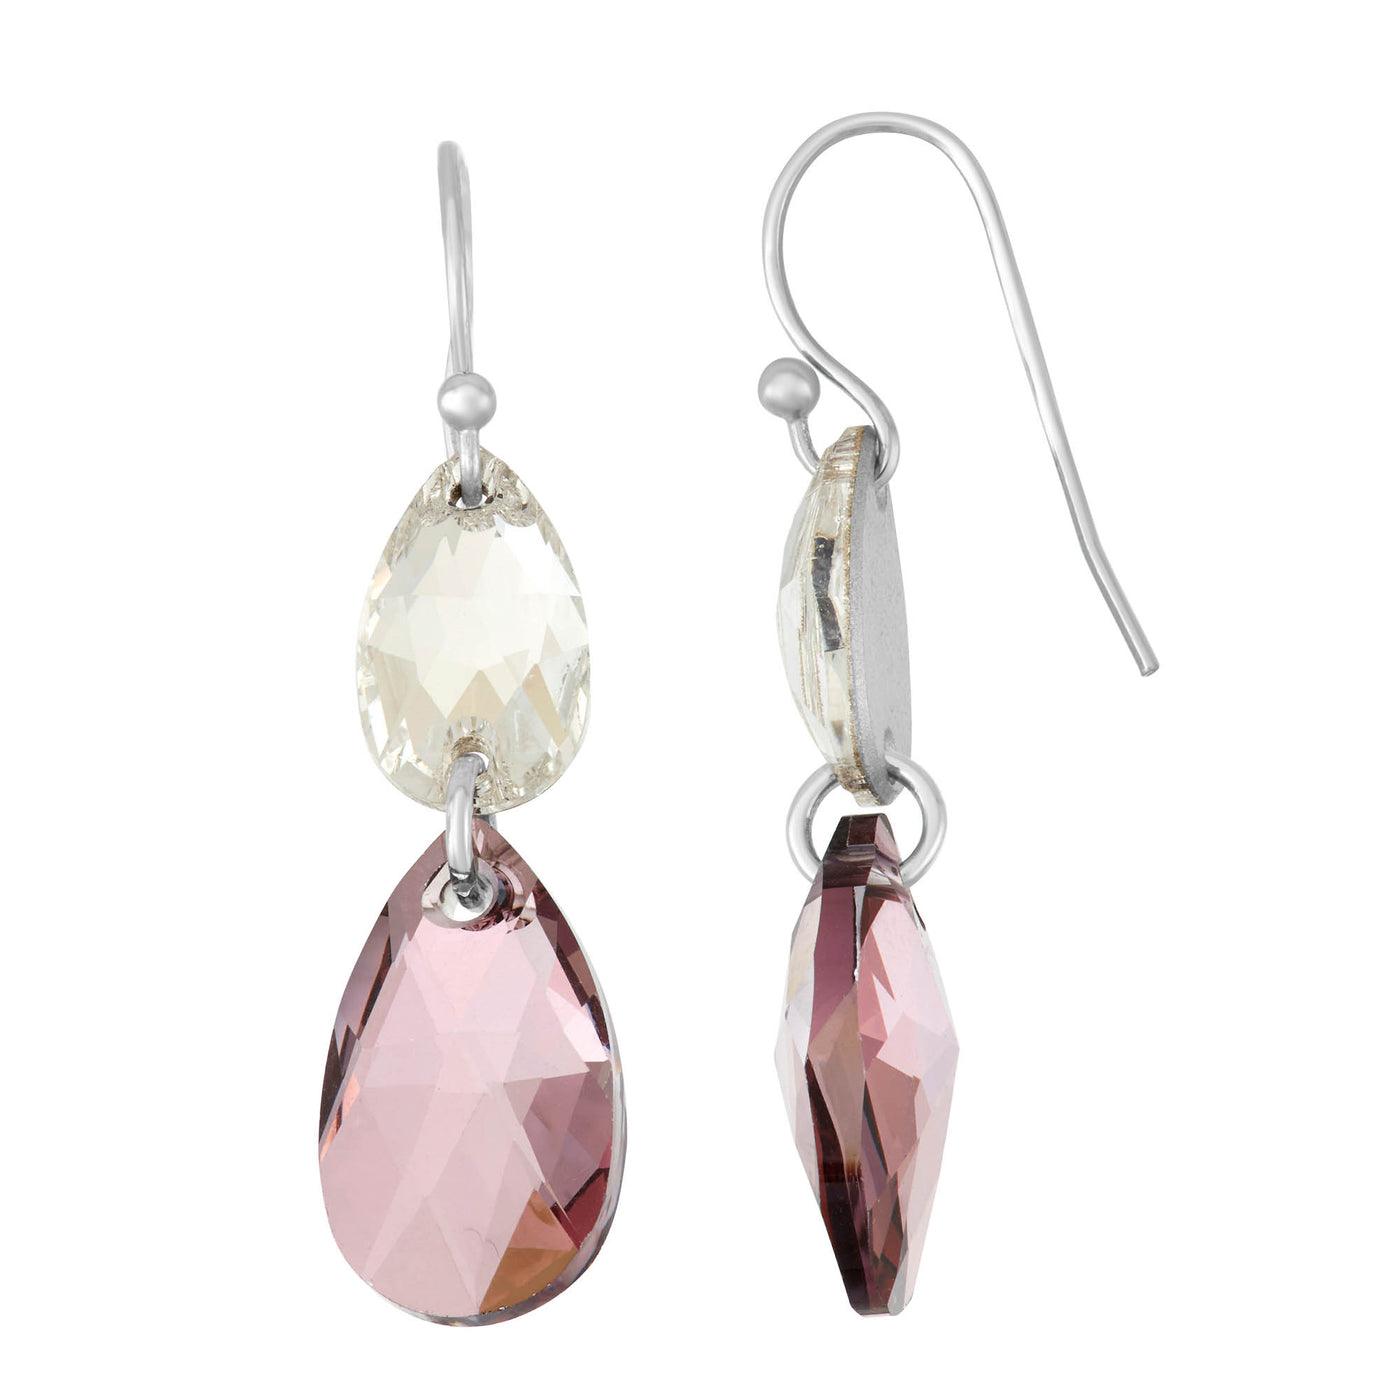 Rebecca Sloane Silver Duo Tear Drop Earring With Pink Crystals